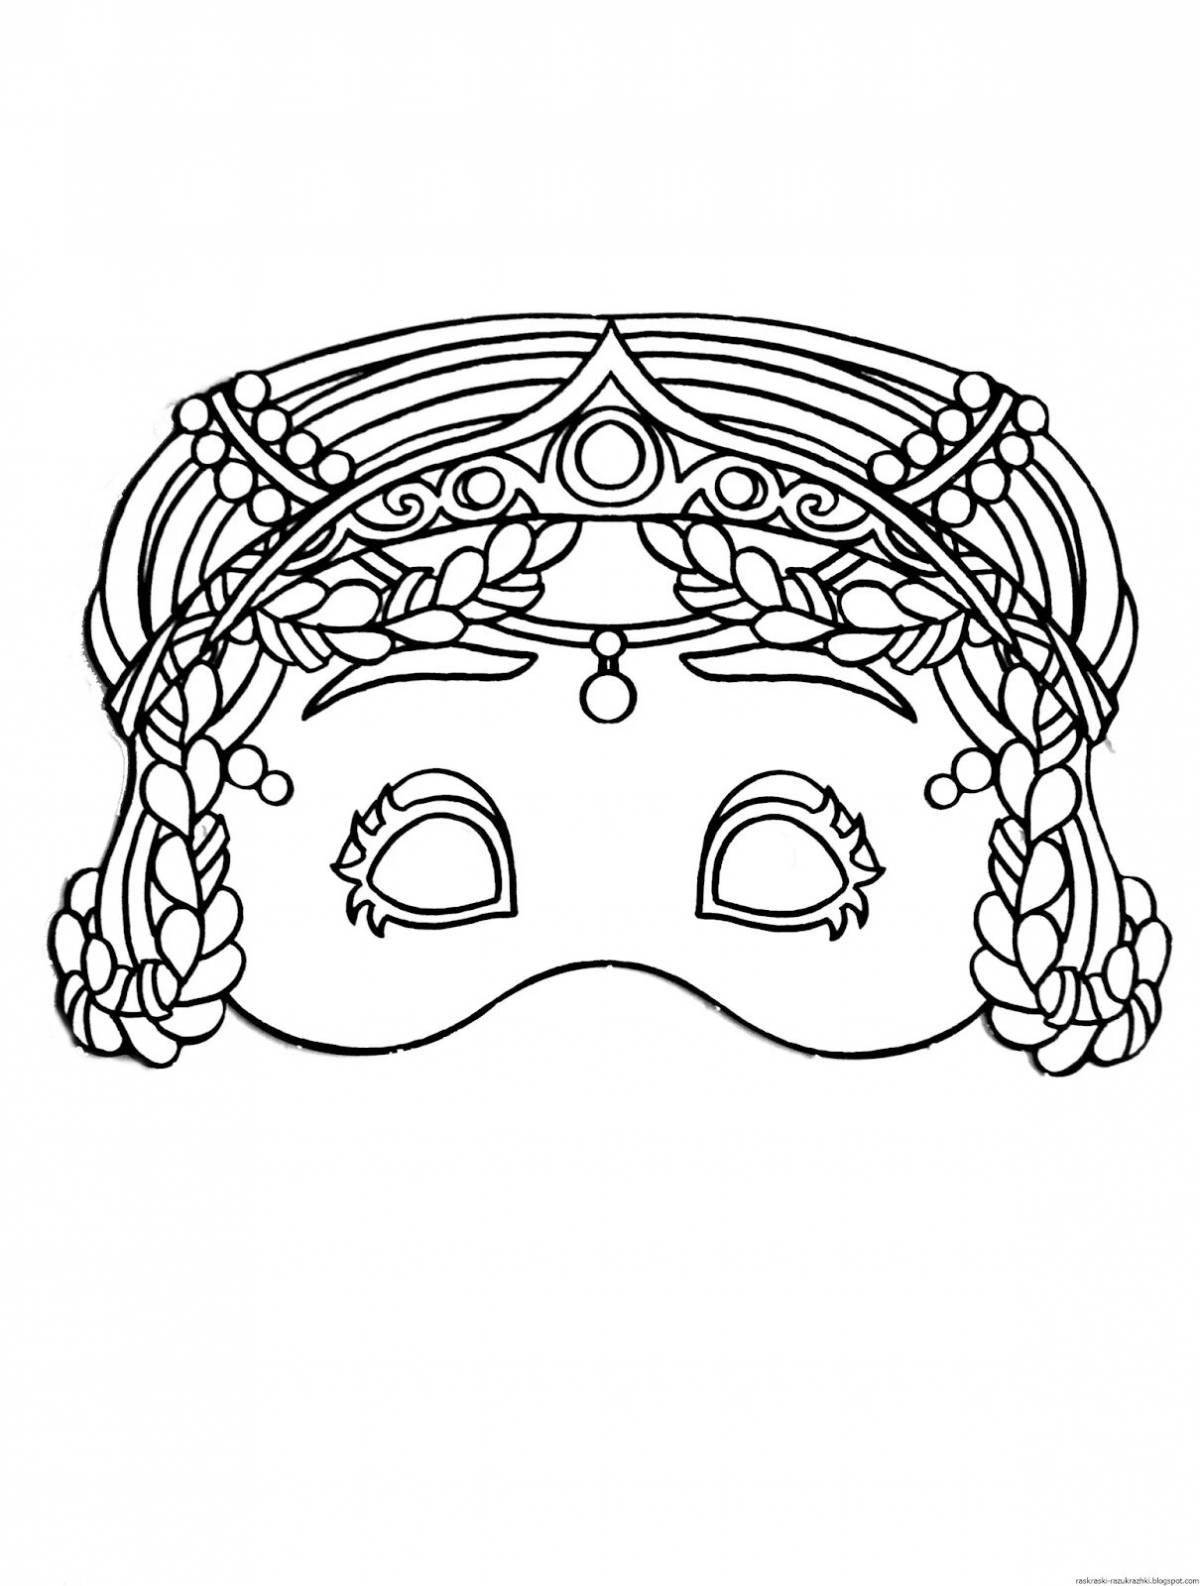 Coloring book shining mask for girls